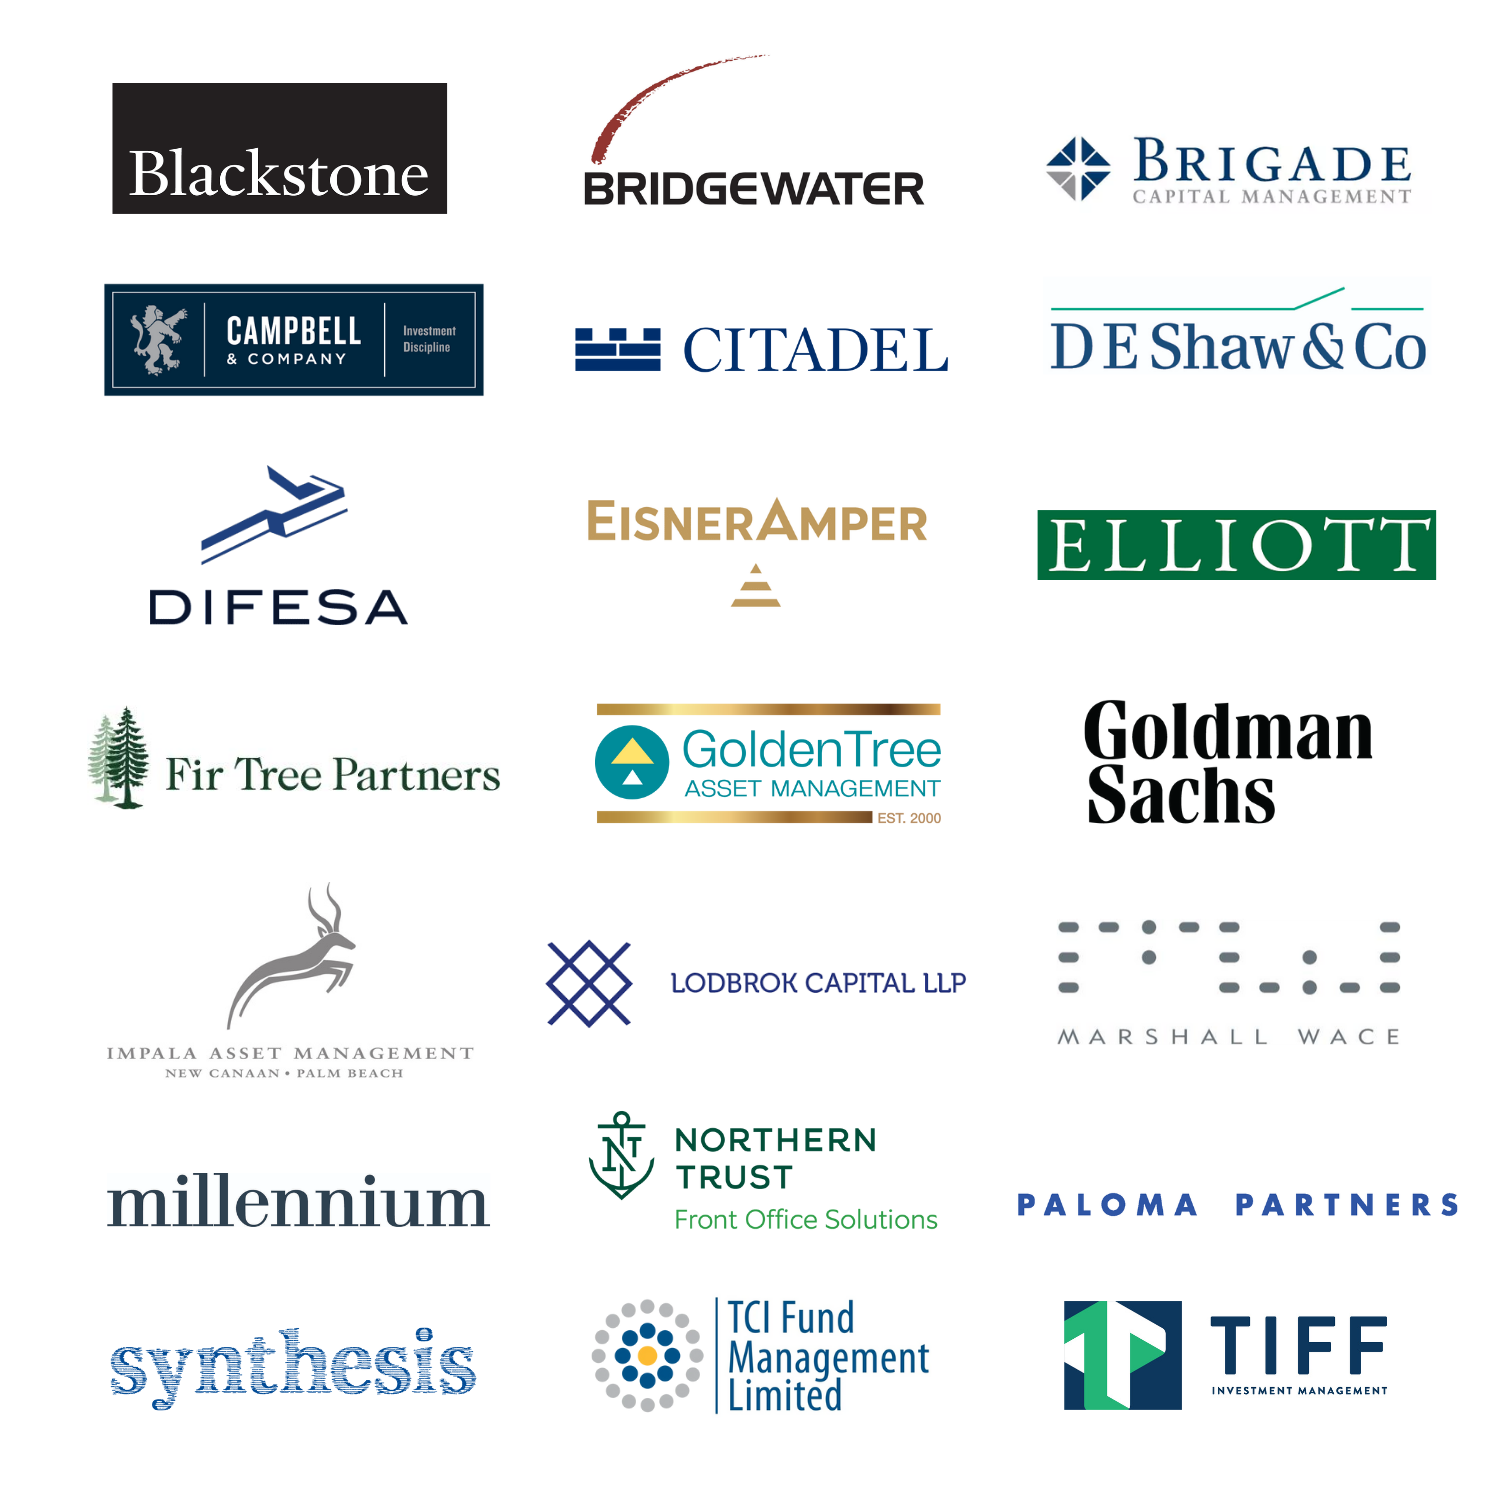 19th Annual Hedge Fund Industry Awards